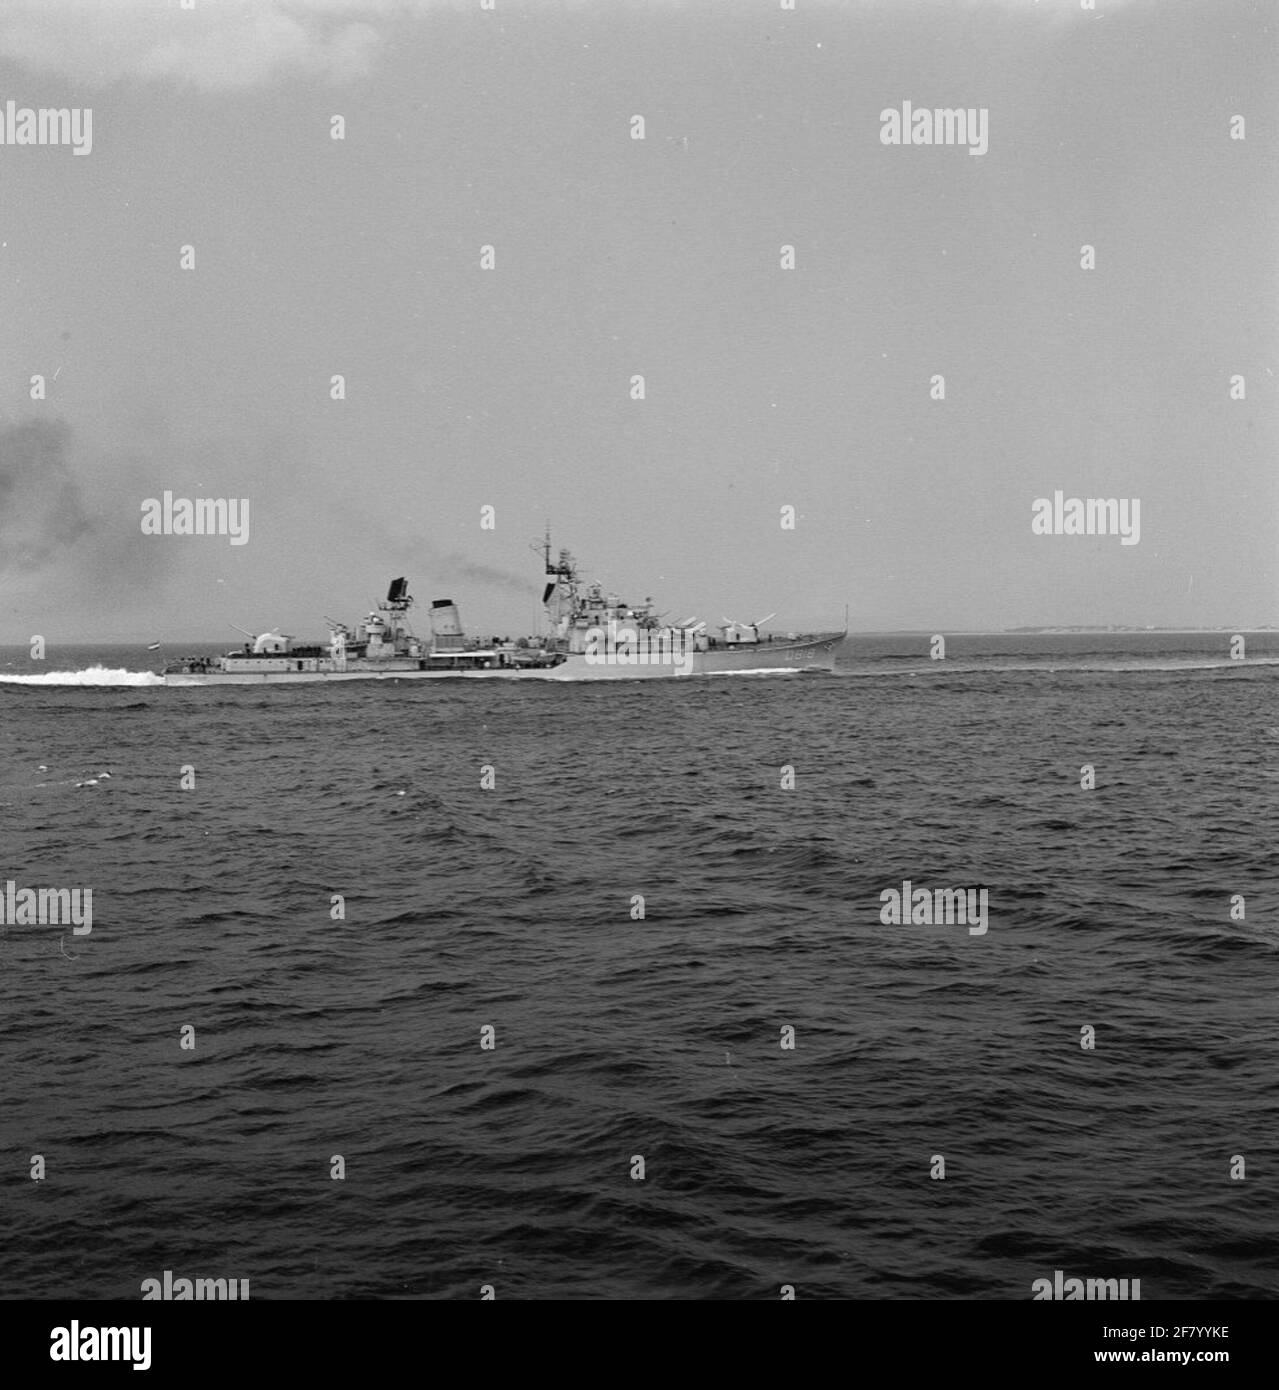 Swedish Submarine High Resolution Stock Photography and Images - Alamy